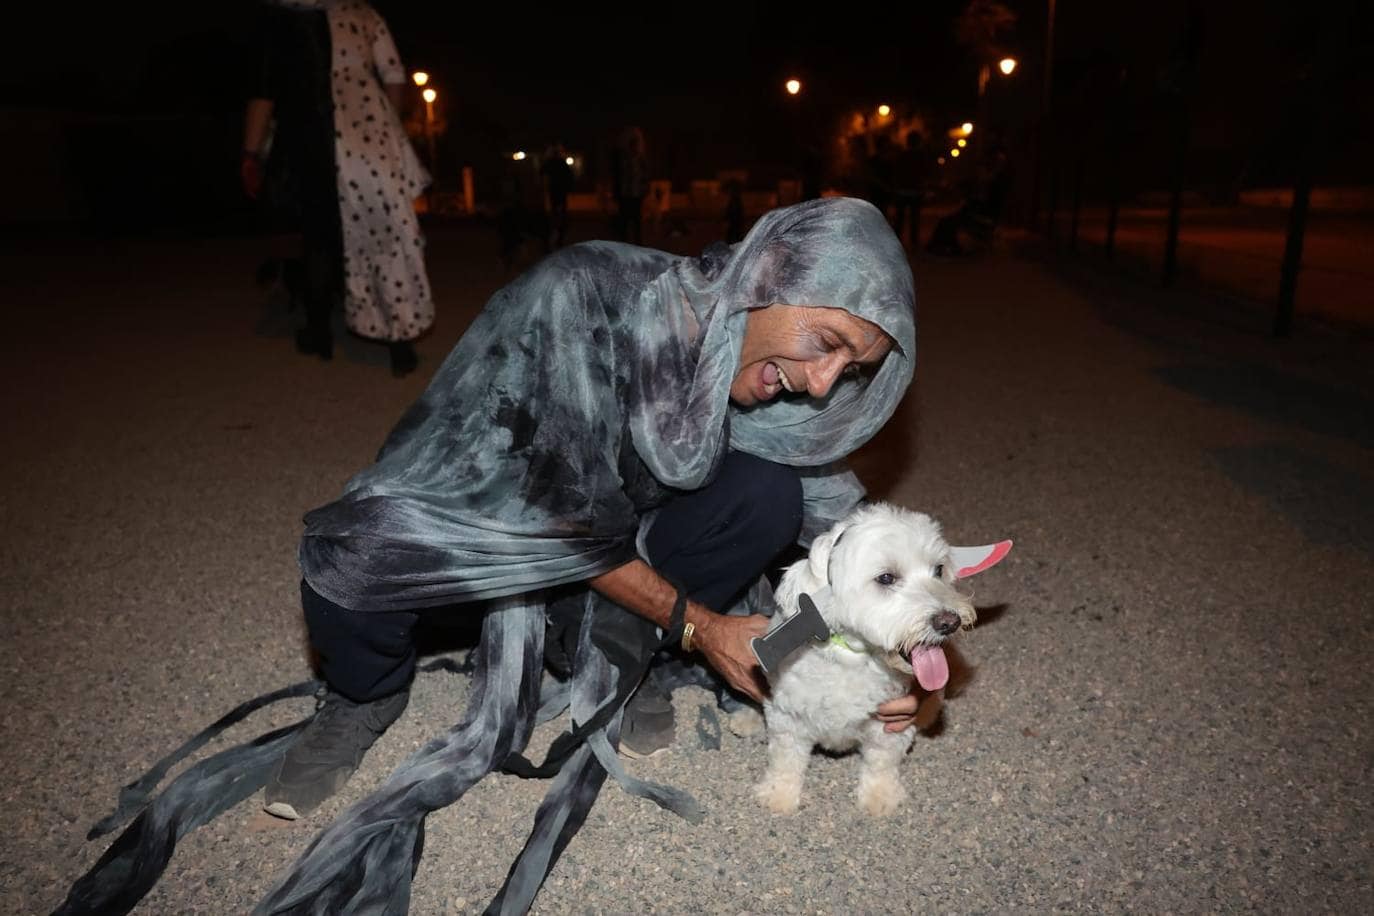 Halloween with pets in Guadalmar.